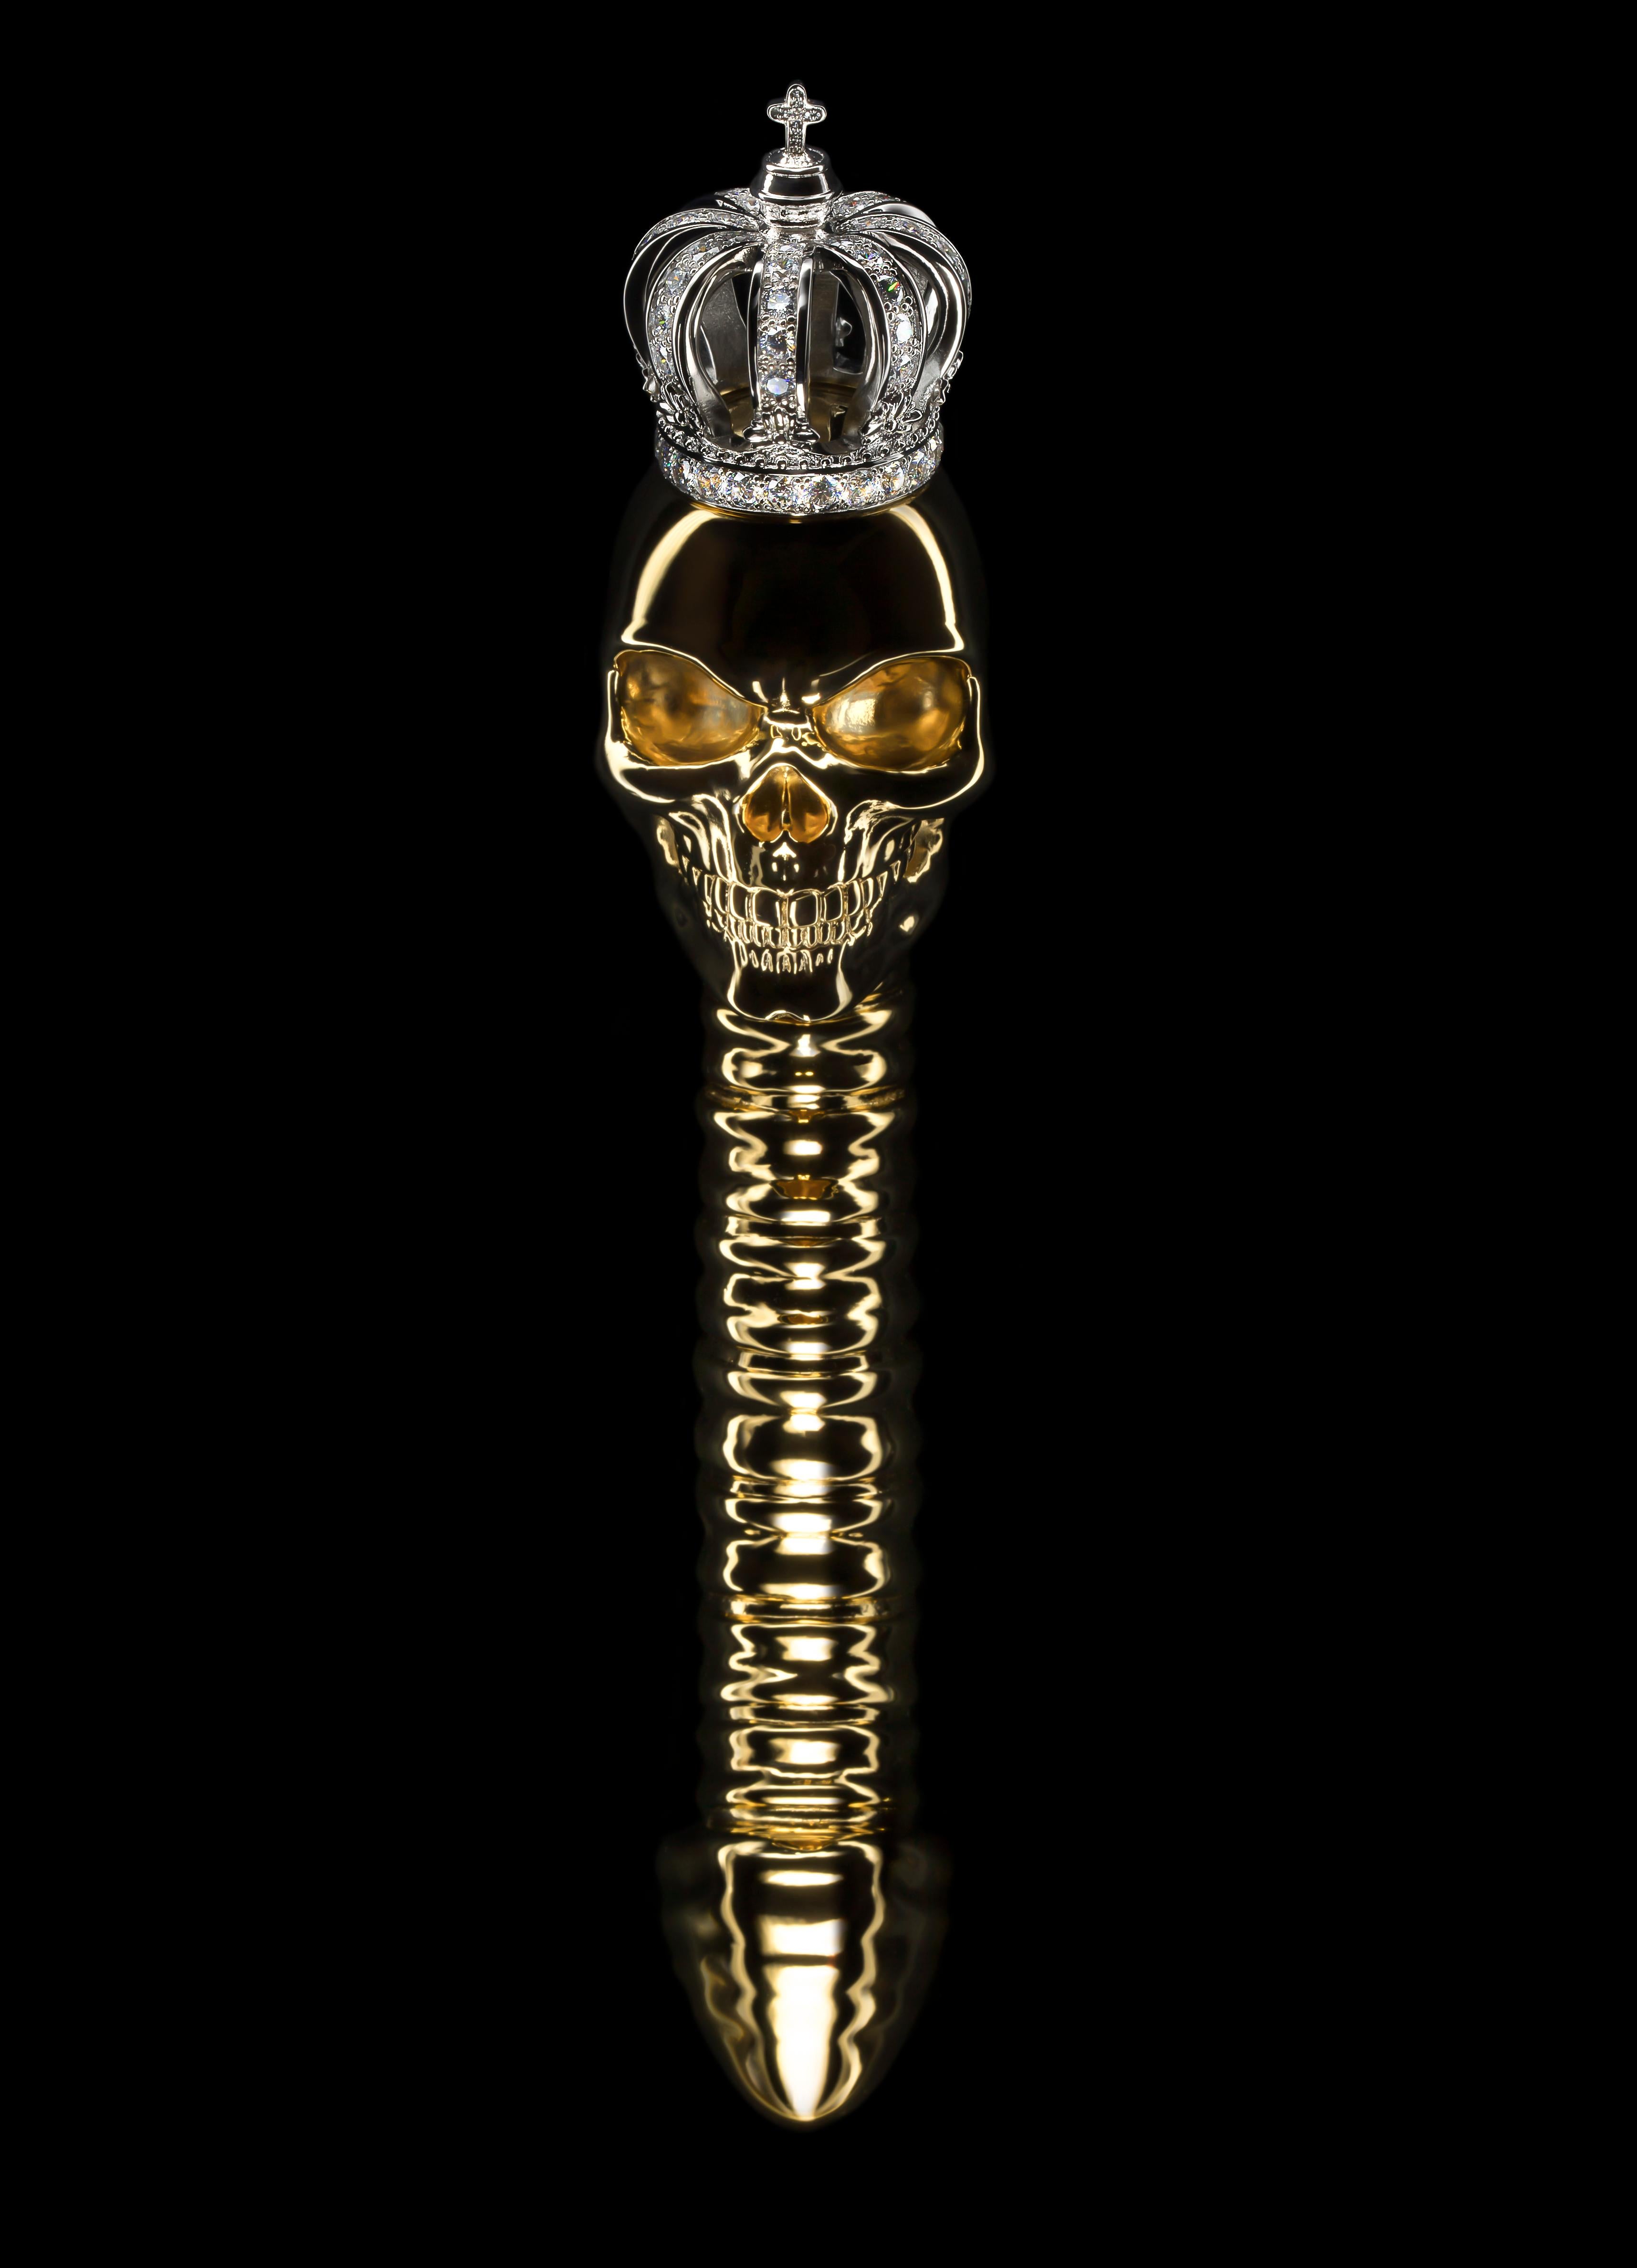 The Kings Remains olisbos sculpture is electroformed from pure 24K yellow gold. This skull and spinal sculpture features an 18K solid white gold regal crown, set with 10 carats of flawless sparkling white diamonds. The sculpture comes with a clear